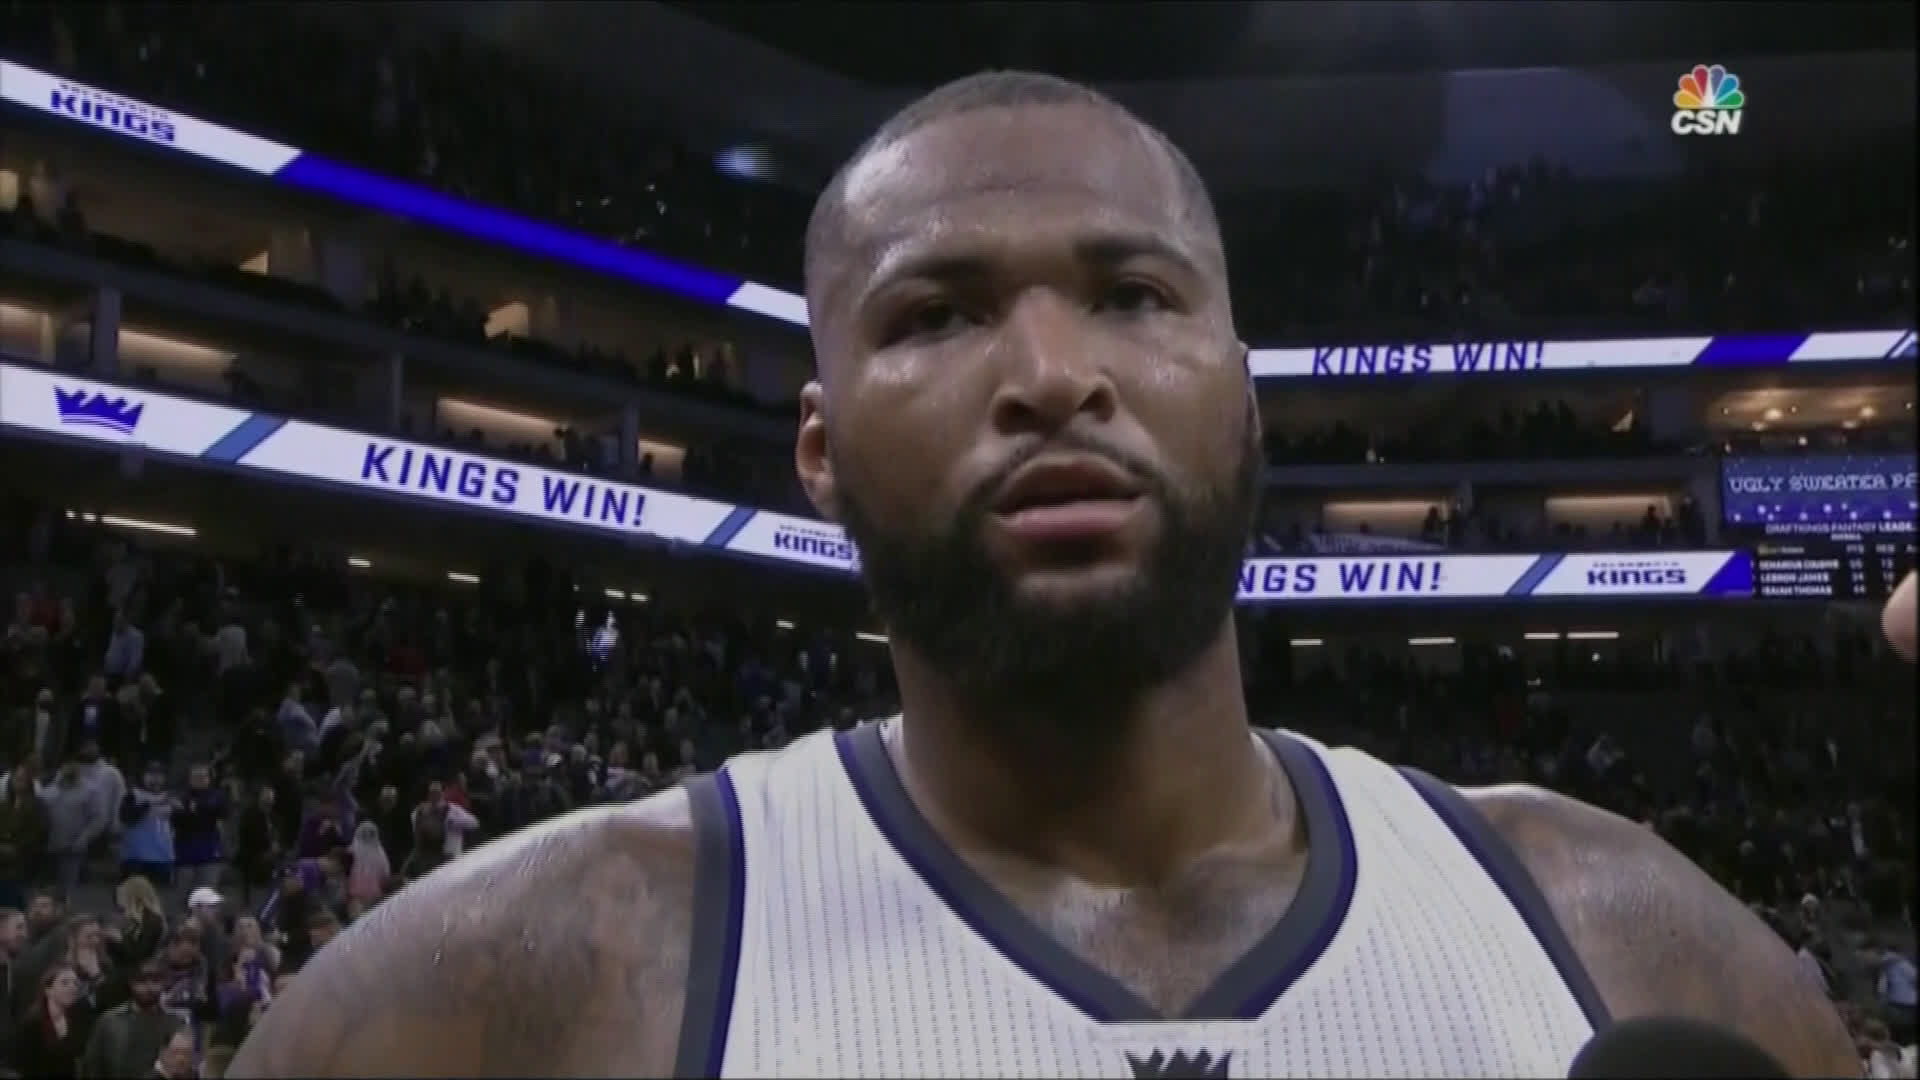 DeMarcus Cousins On Kings Draft: 'I Can't Control That